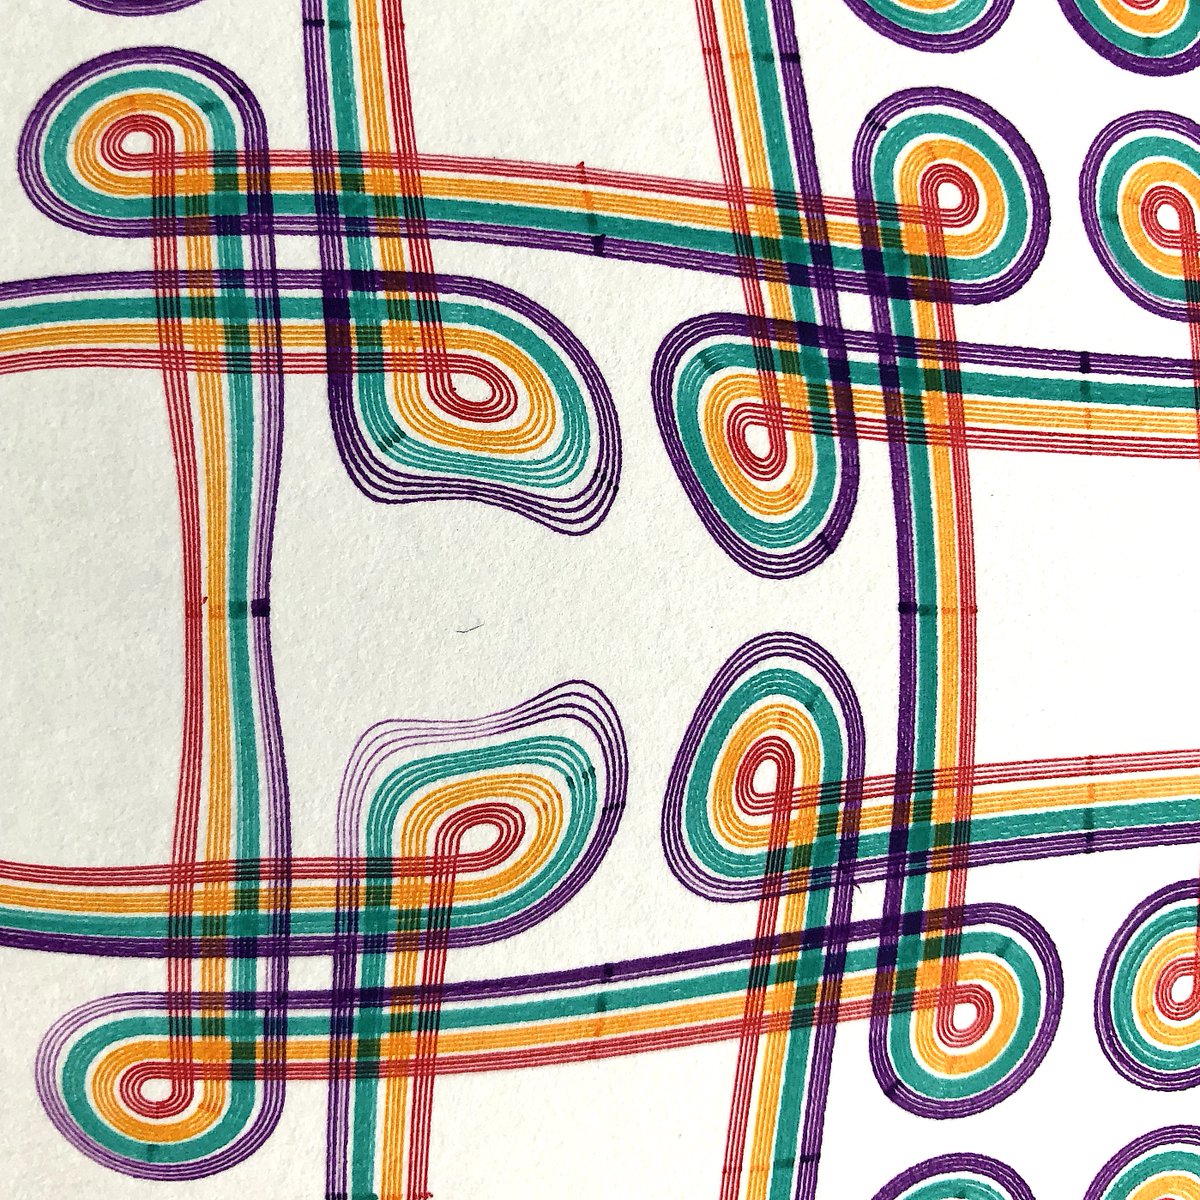 Day 10 of  #inkotober on the plotter!Knot pattern with distortion and frayed edges.All gcode and c++ source code available here:  https://github.com/andymasteroffish/inktober_2020 #inktober2020 #inktober2020day10 #plottertwitter